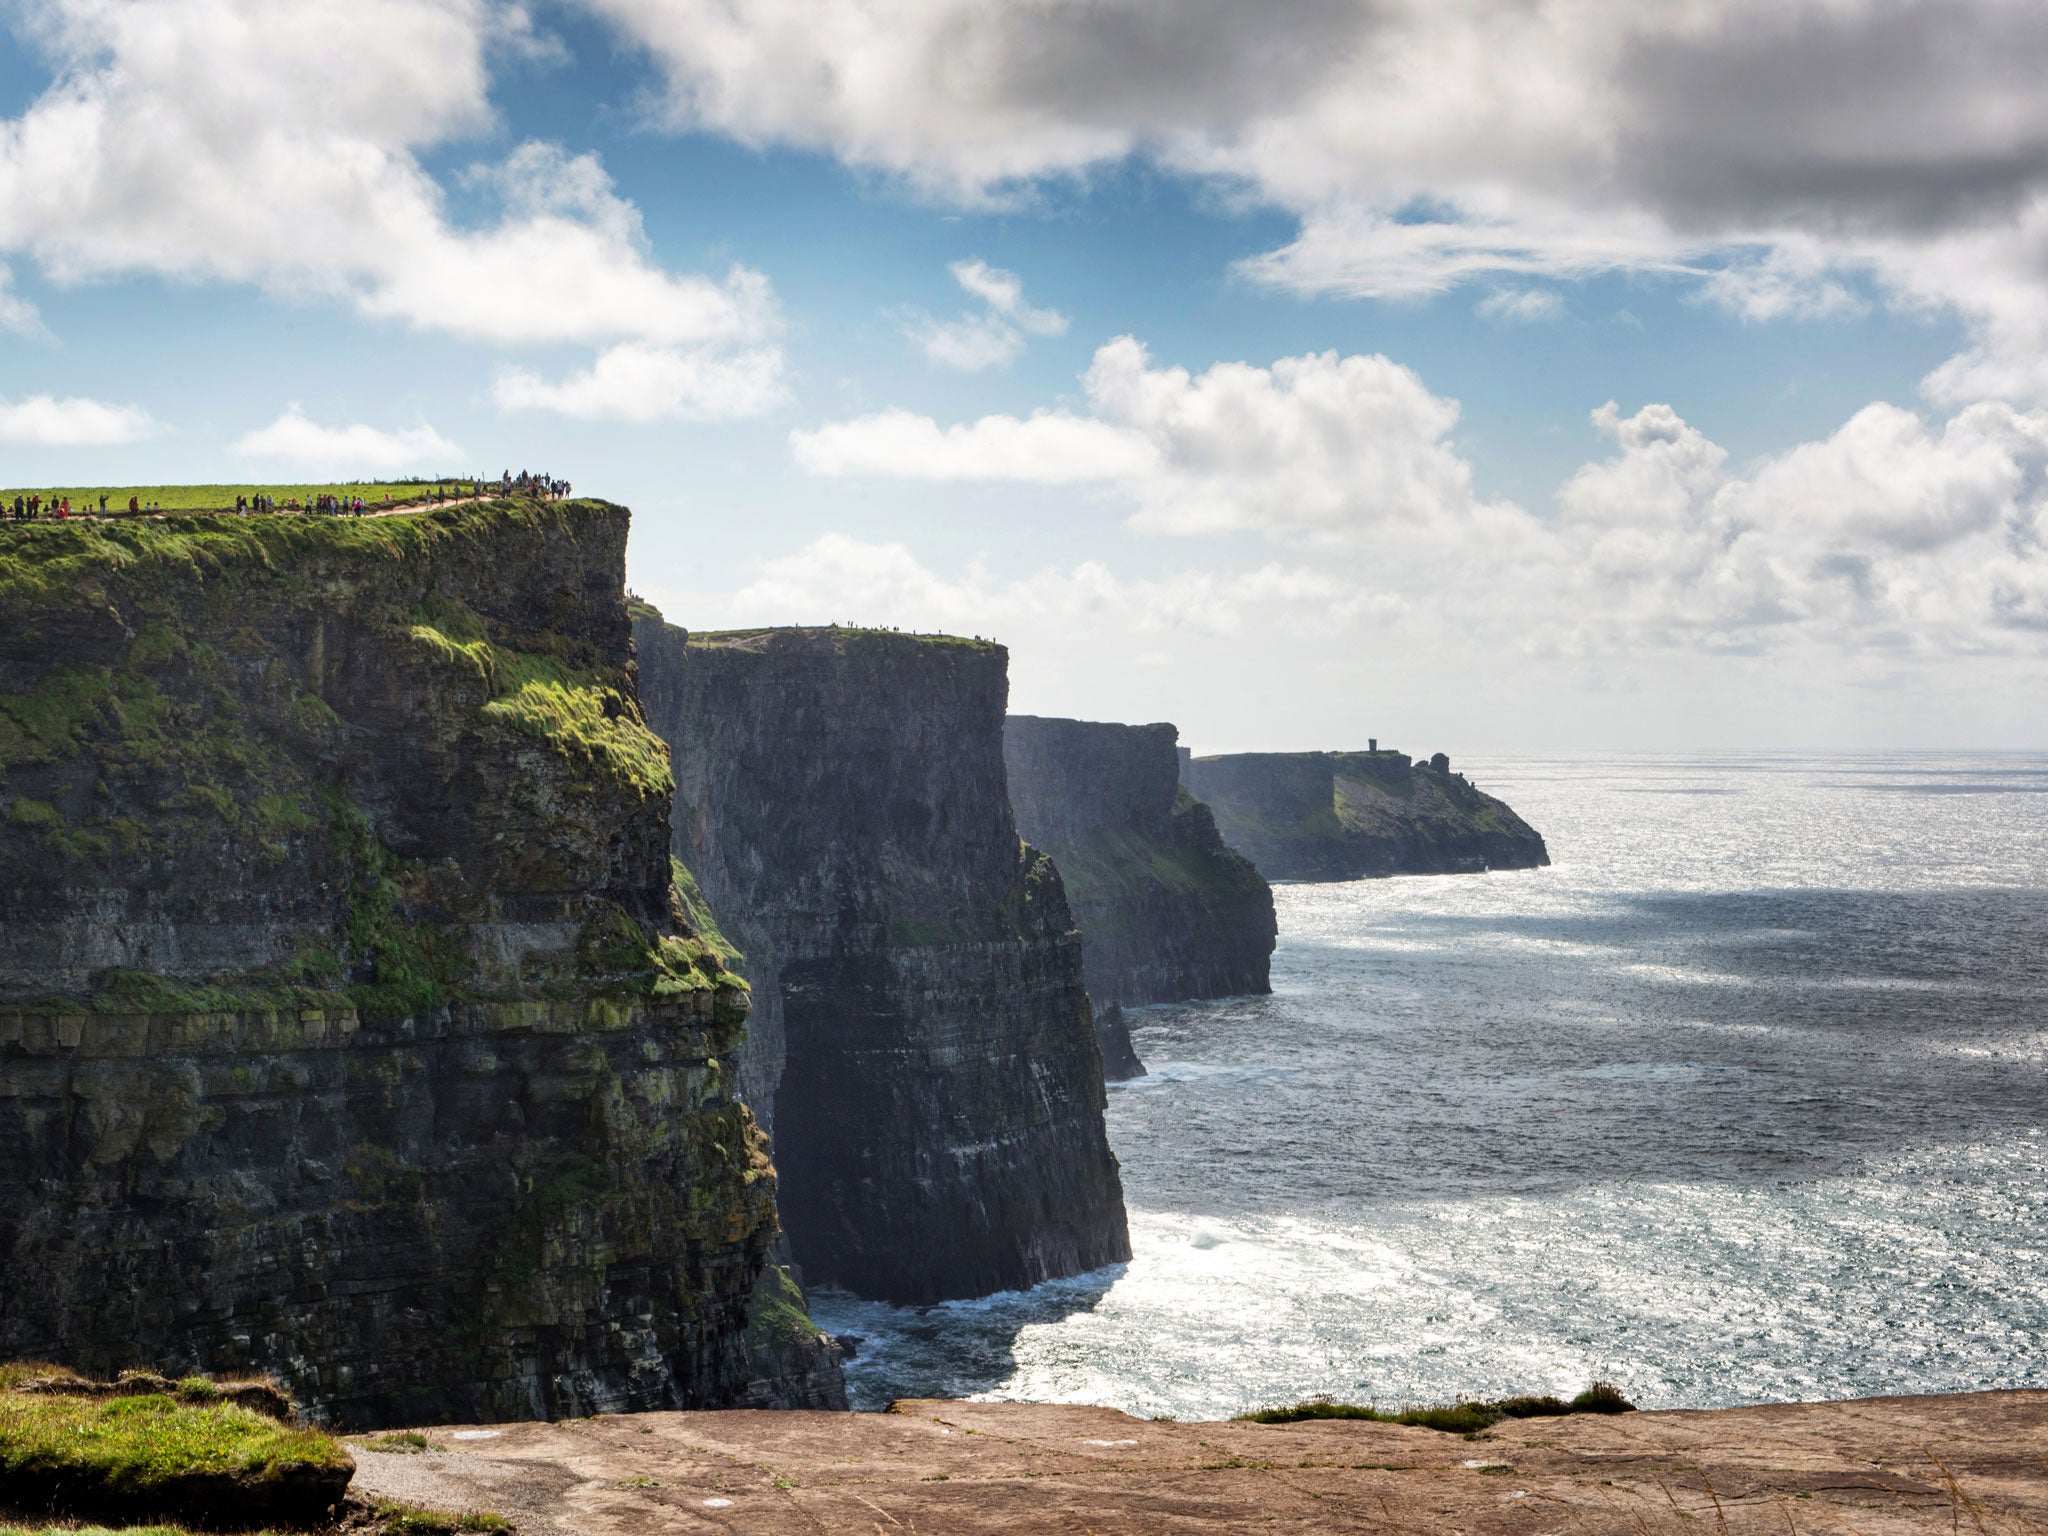 A richly-summoned landscape: County Clare, in Ireland